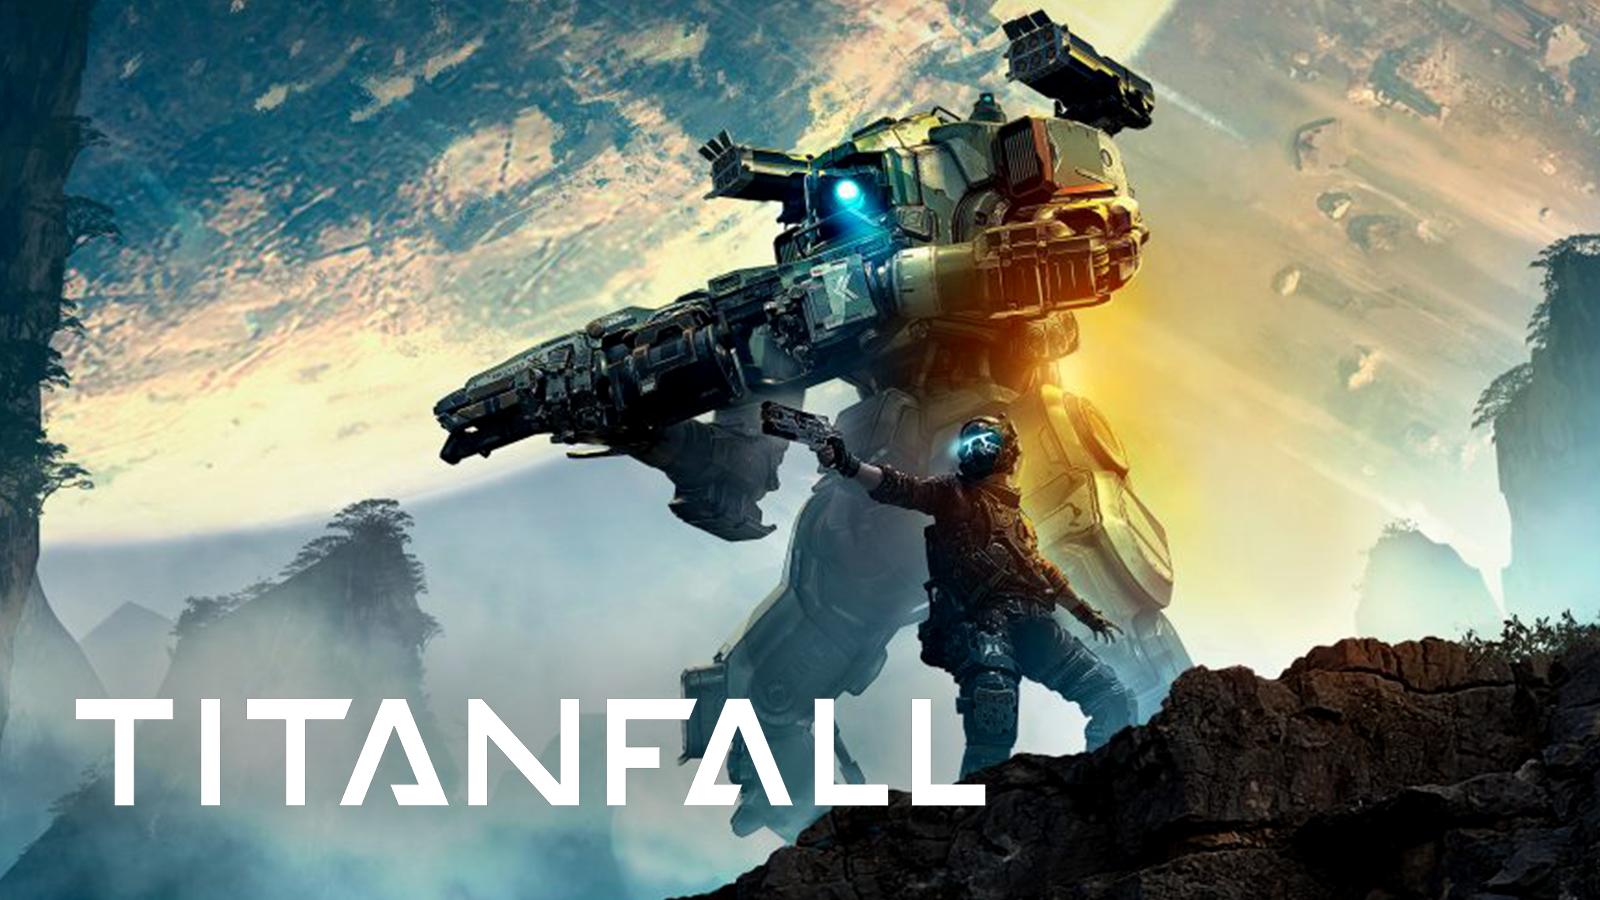 Titanfall 2 Developer open to cross-play between Consoles and PC